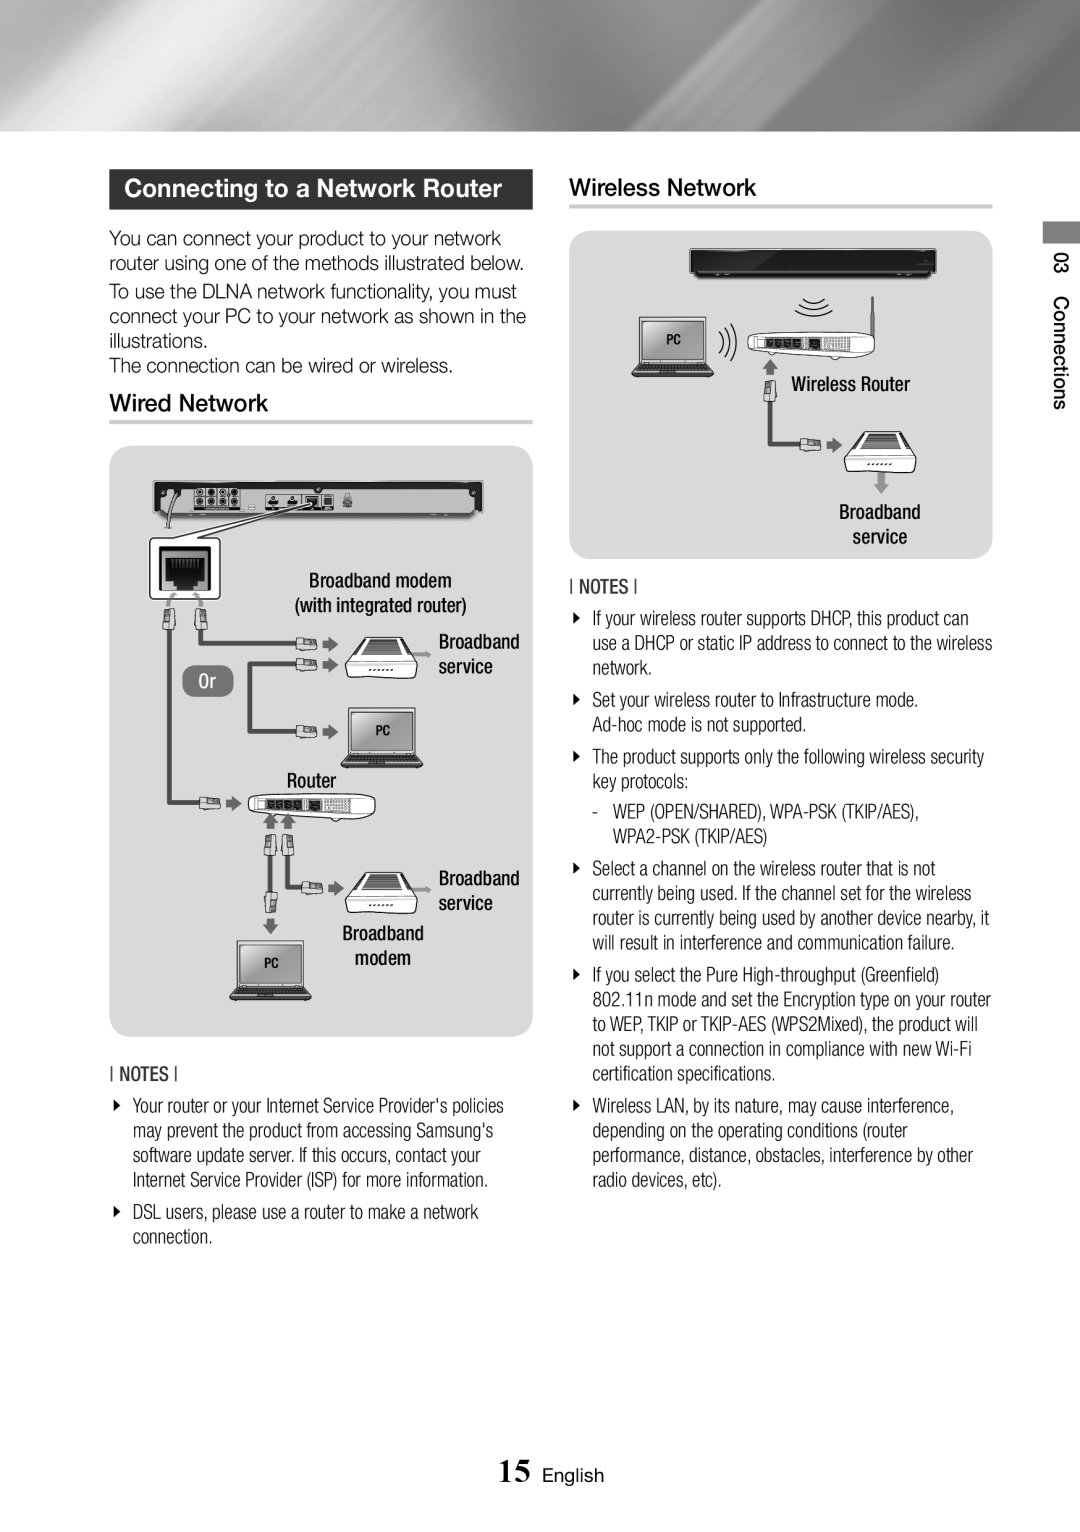 Samsung BD-J7500/EN manual Connecting to a Network Router, Wired Network, Wireless Network 